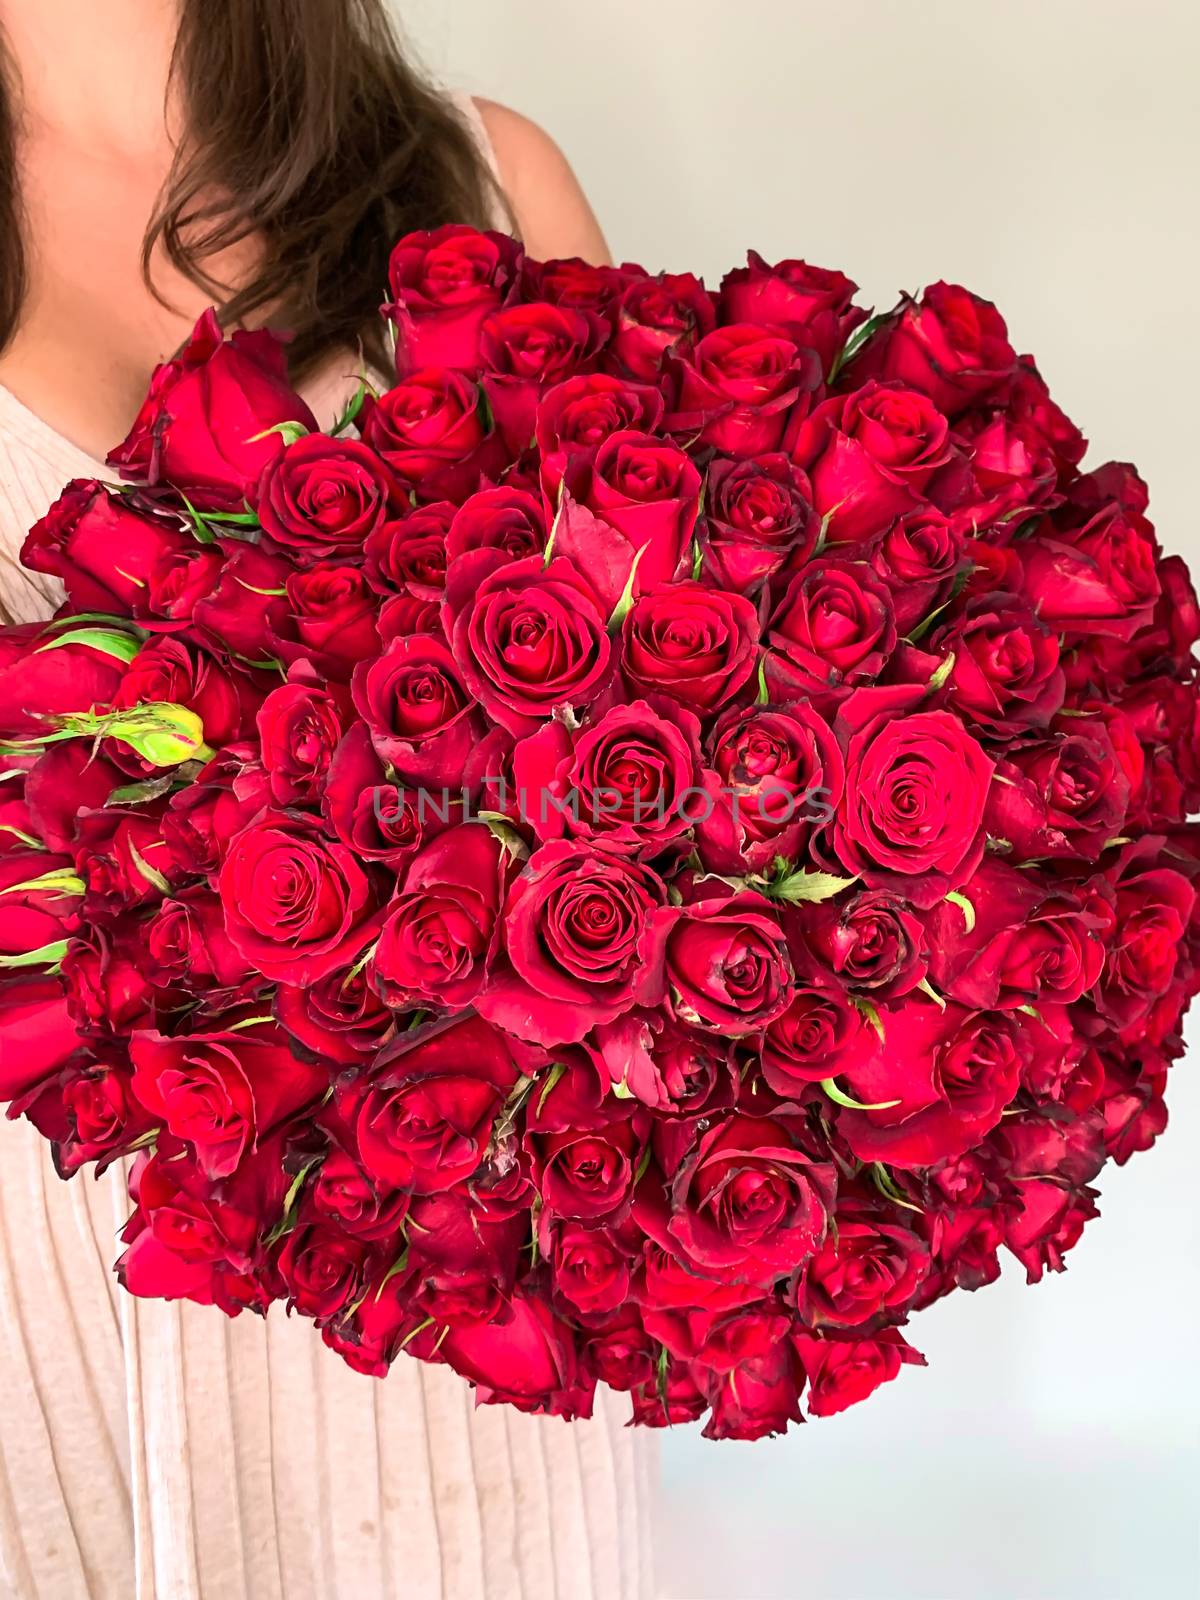 A young girl holding in hands a huge bouquet of 101 wonderful re by AlonaGryadovaya